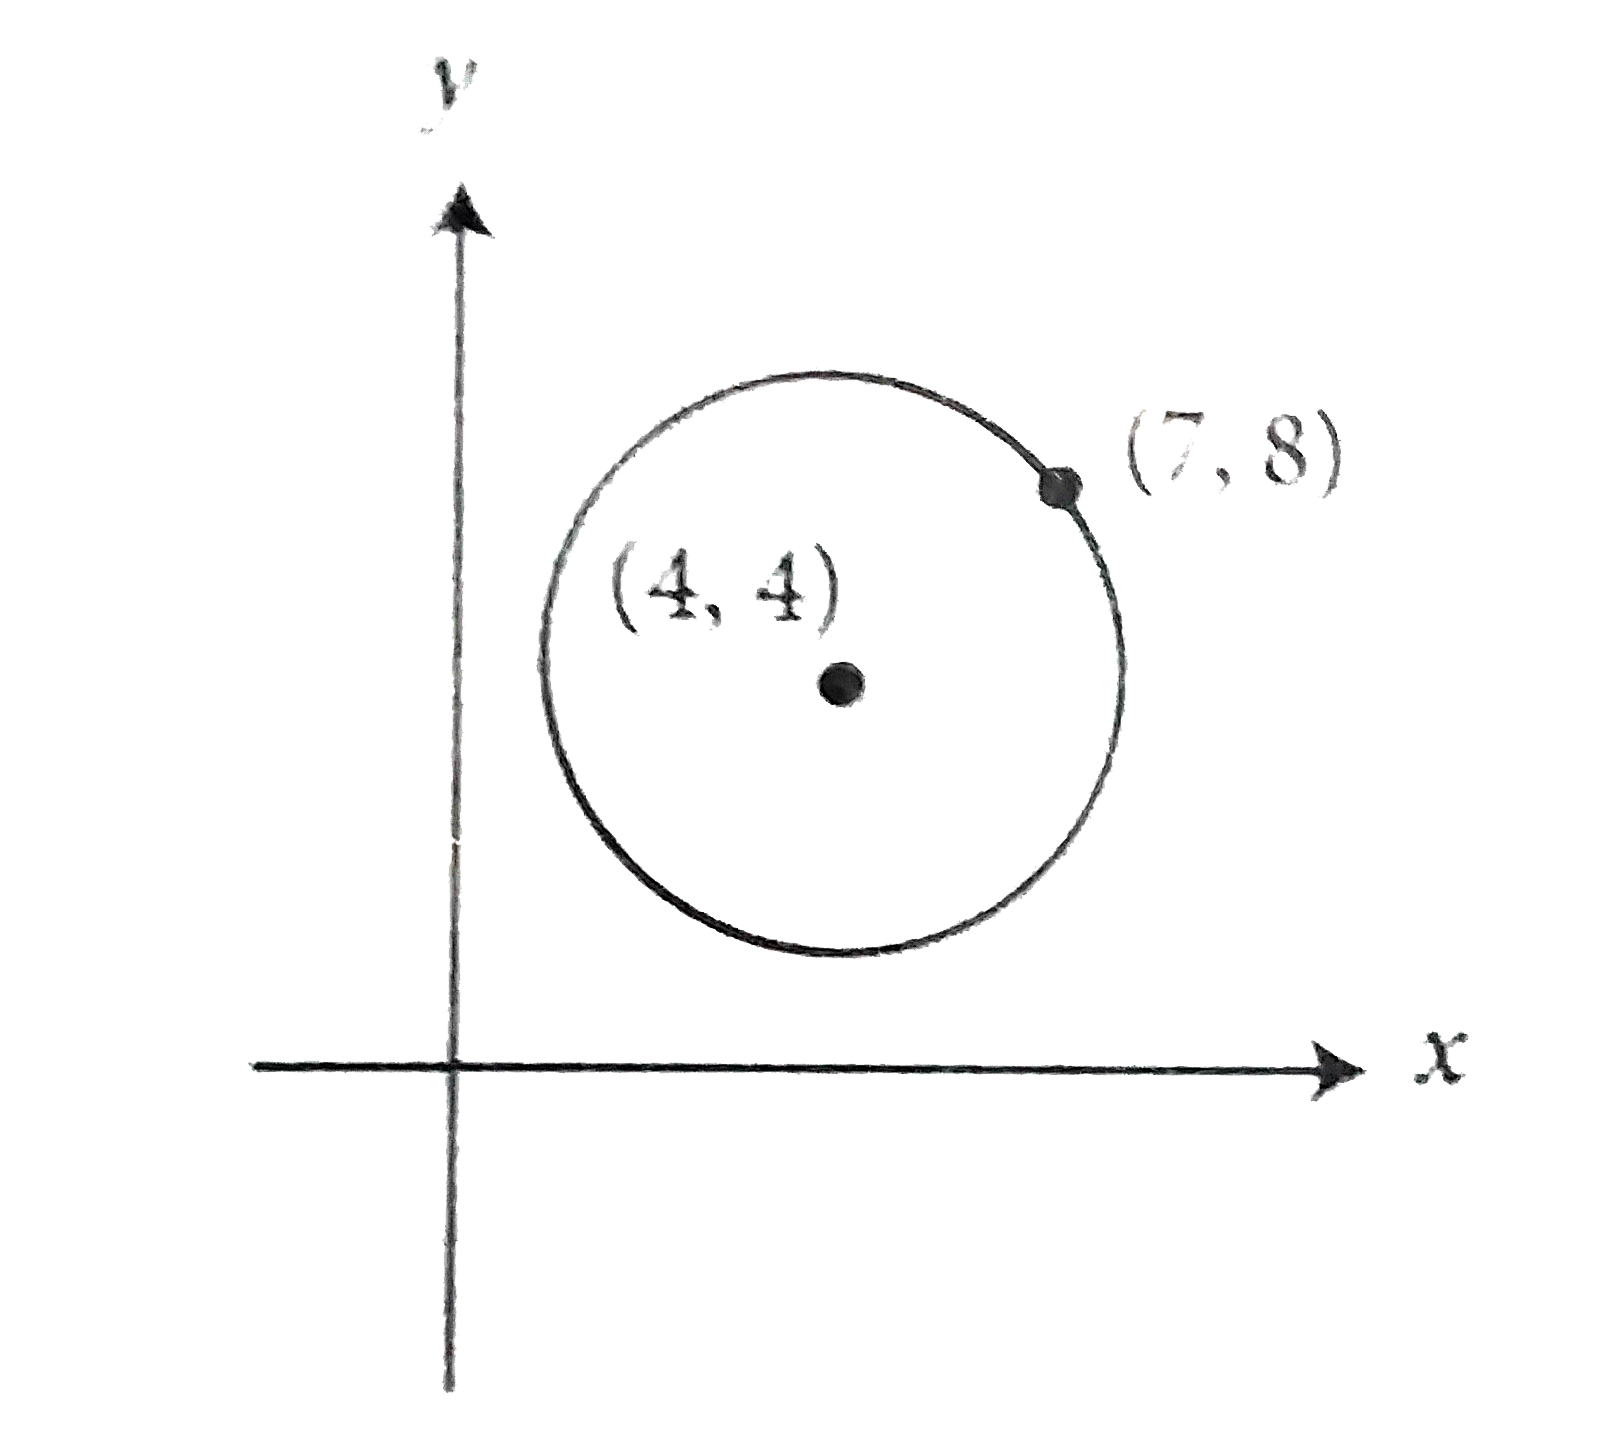 the circle defined by the equation (x-4)^2+(y-4)^2=25 has its centre at point (4,4) and includes point (7,8) on the  circle. This is shown in the figure above. What is the area of the circle shown?